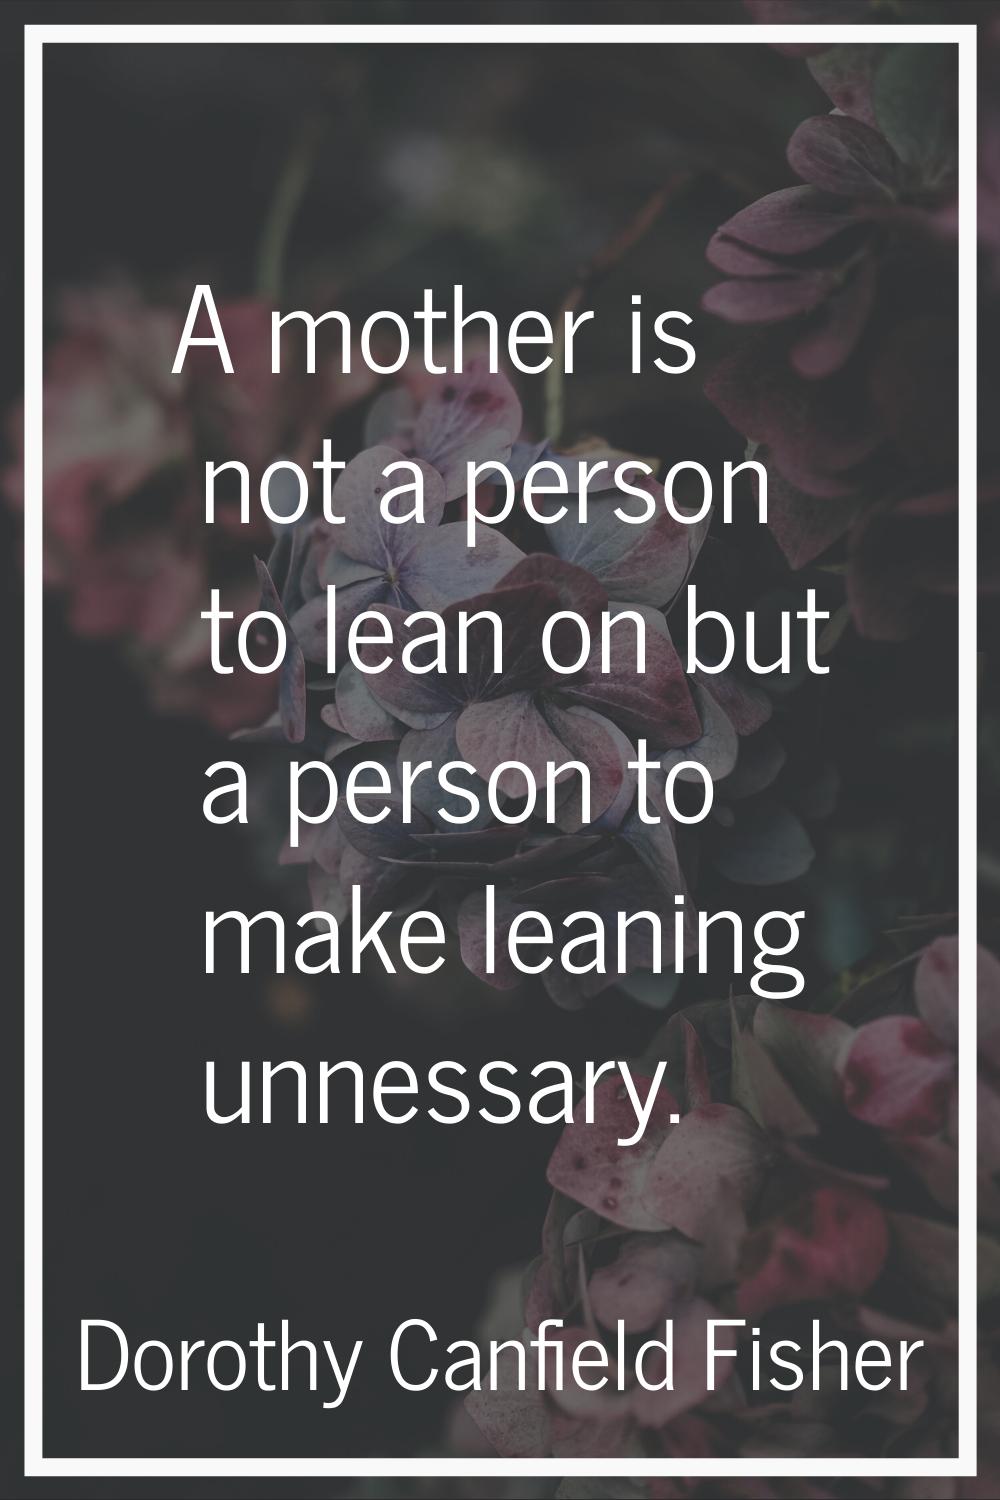 A mother is not a person to lean on but a person to make leaning unnessary.